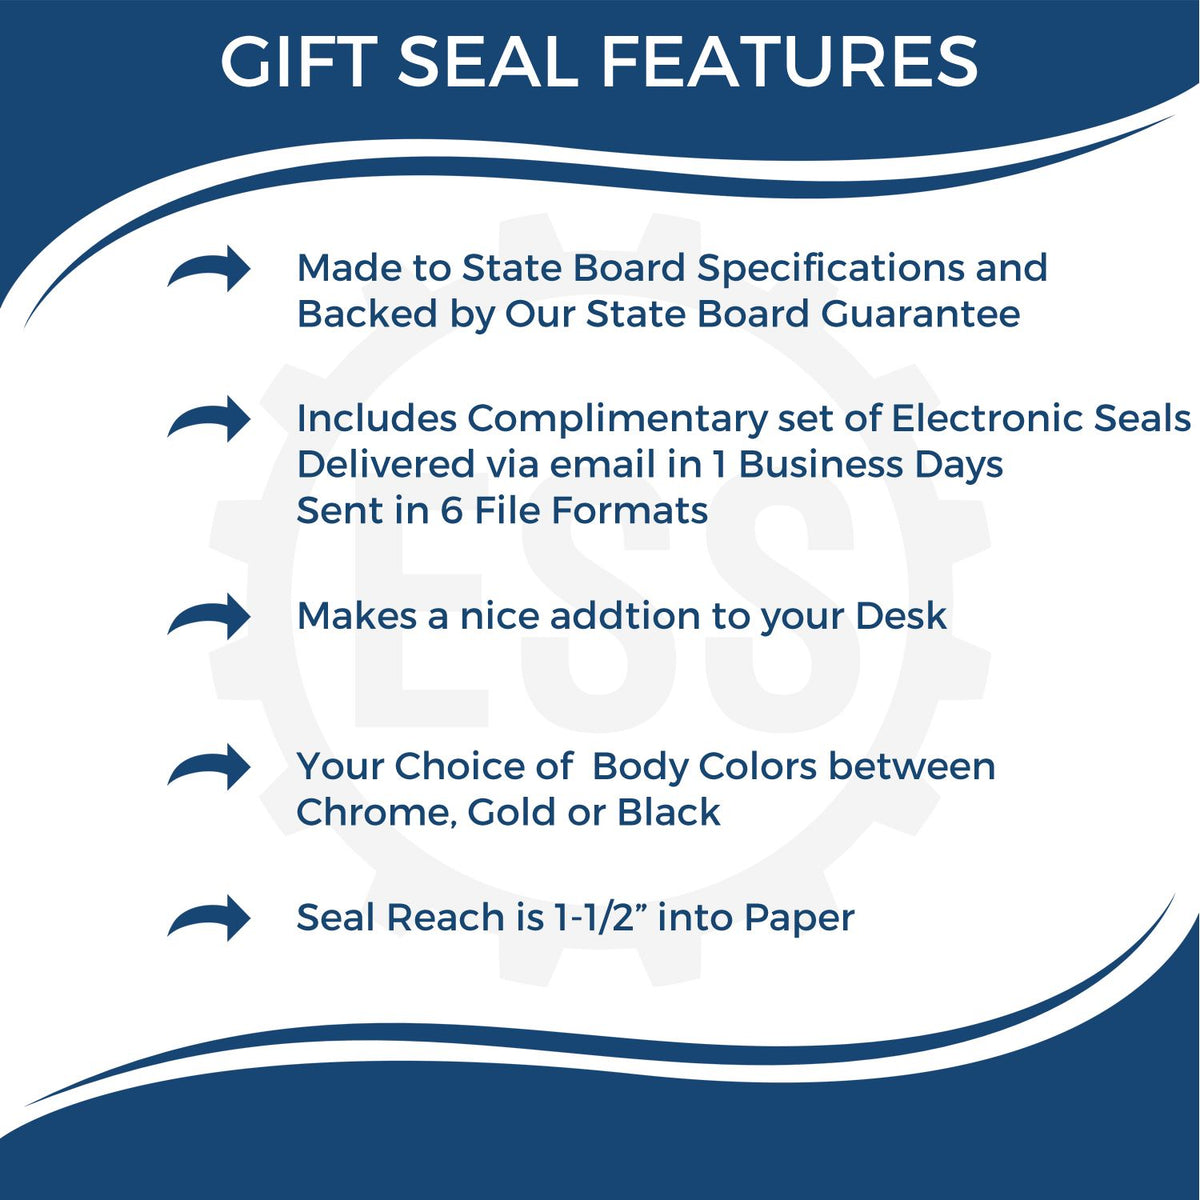 A picture of an infographic highlighting the selling points for the Gift Illinois Architect Seal